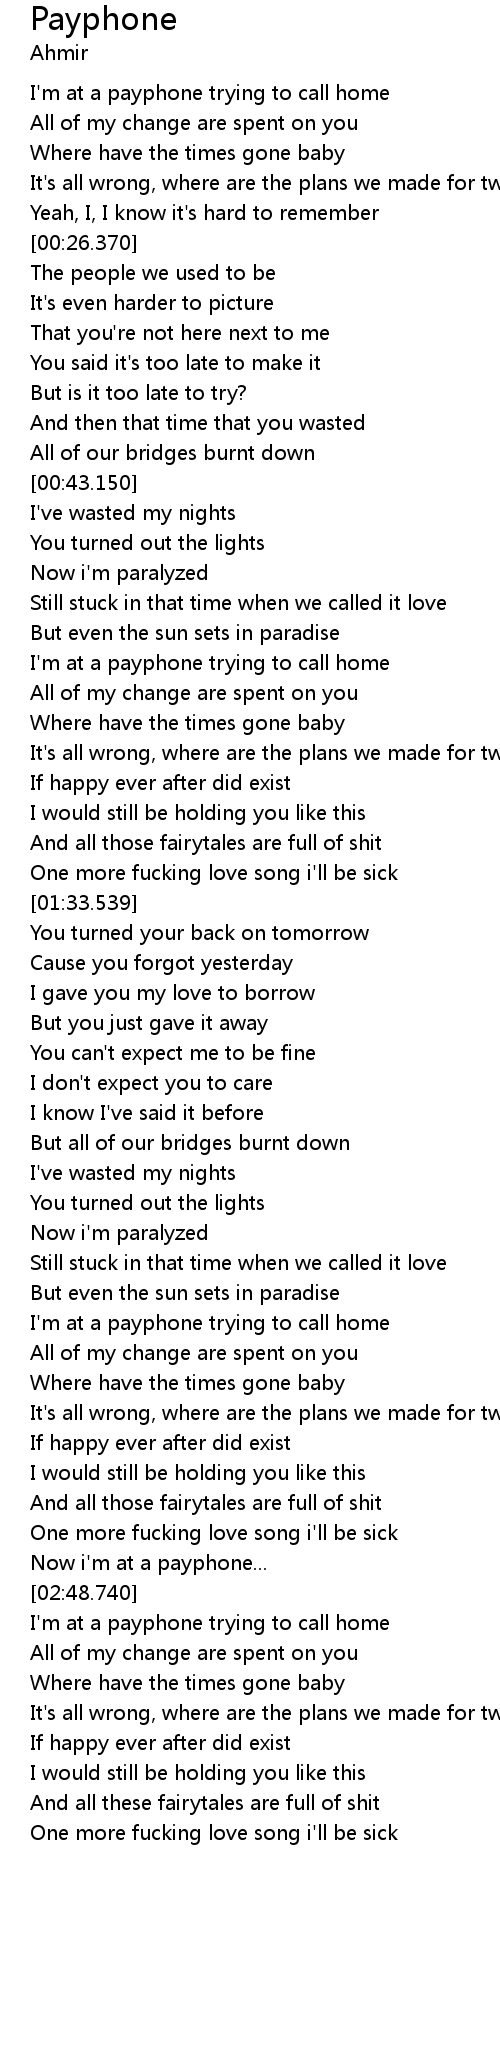 Did if exist lyrics after happy ever I Know